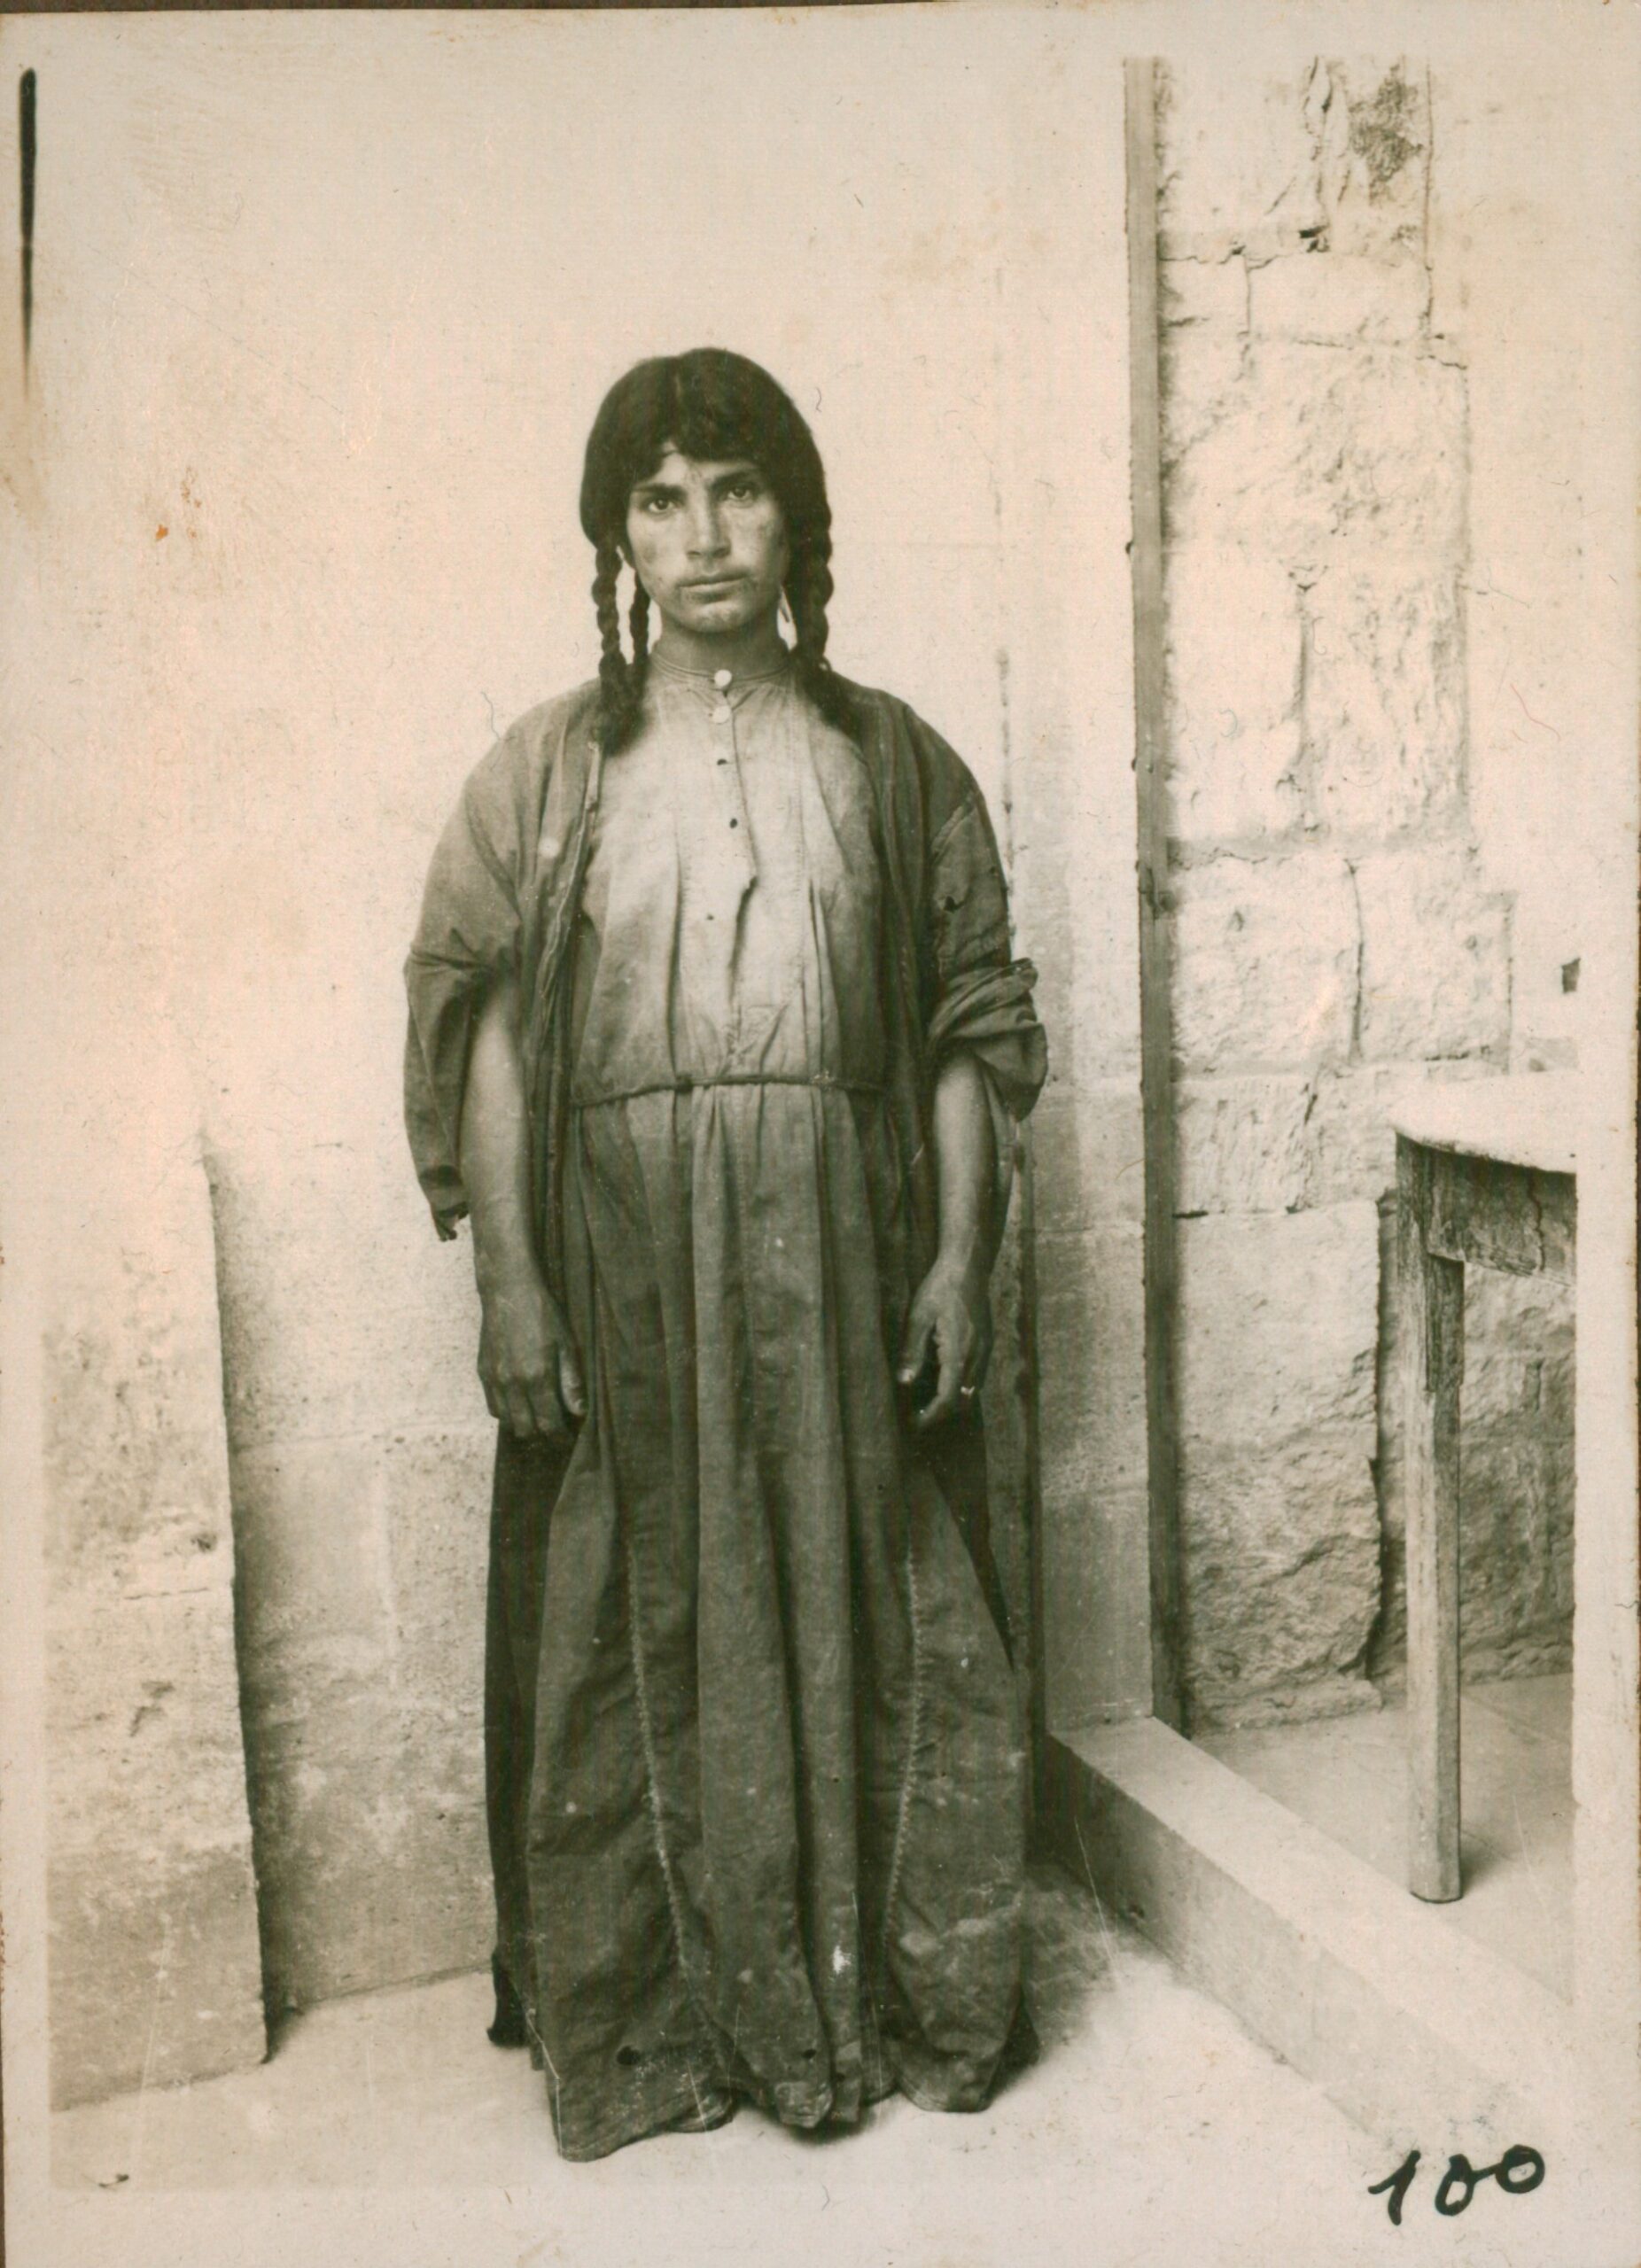 Zumroot Godjanian, from Urfa, c.1924. Photograph provided by the Armenian Genocide Museum-Institute Foundation, Yerevan, Armenia.